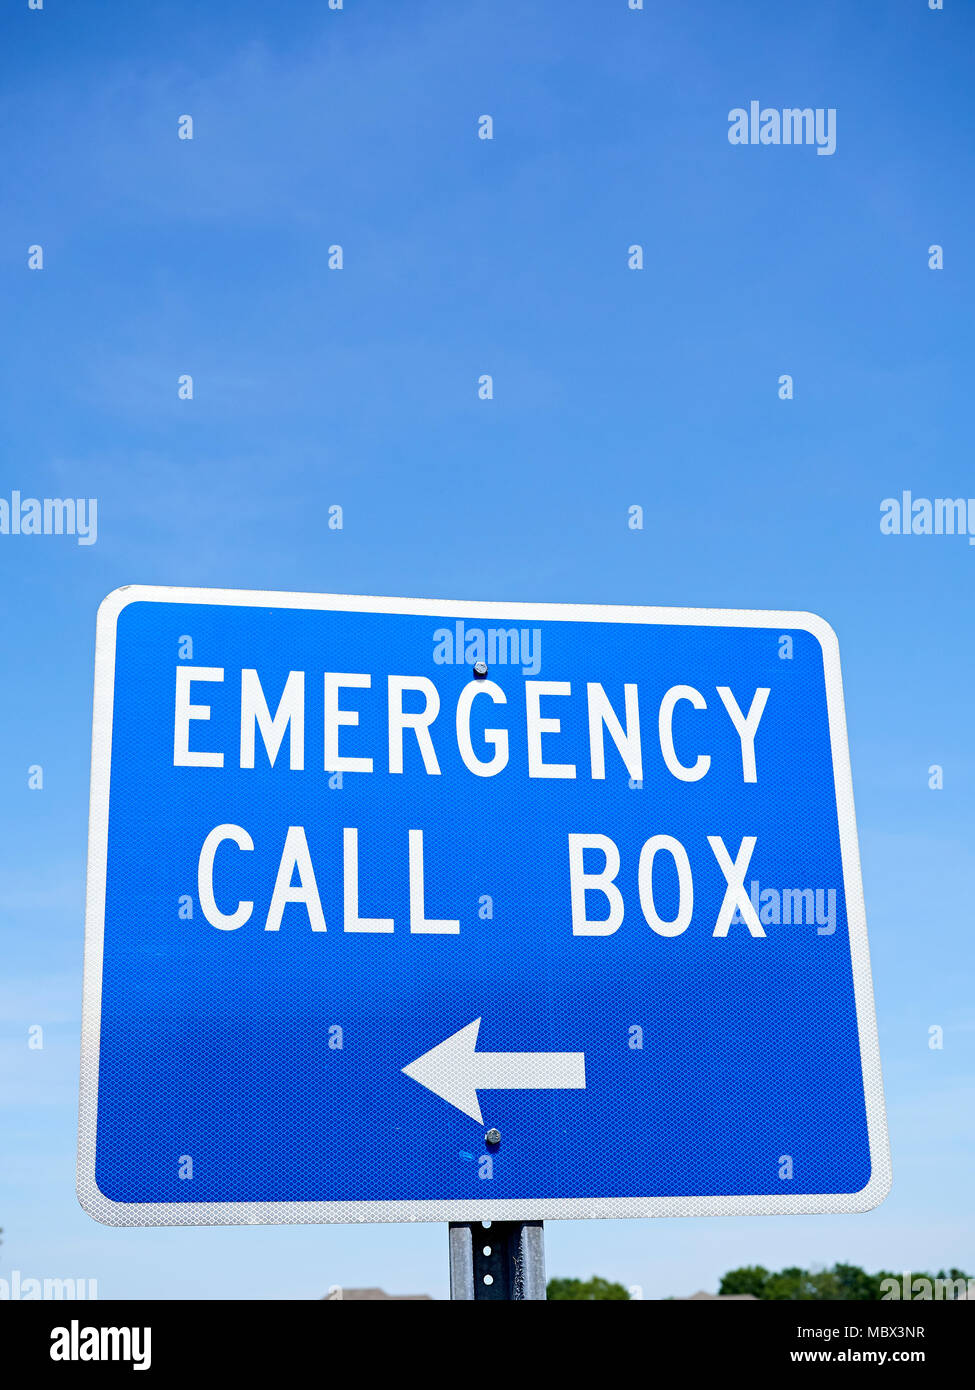 Emergency call box sign pointing in the direction of a communication box that notifies a 911 operator of trouble or an emergency in Alabama USA. Stock Photo